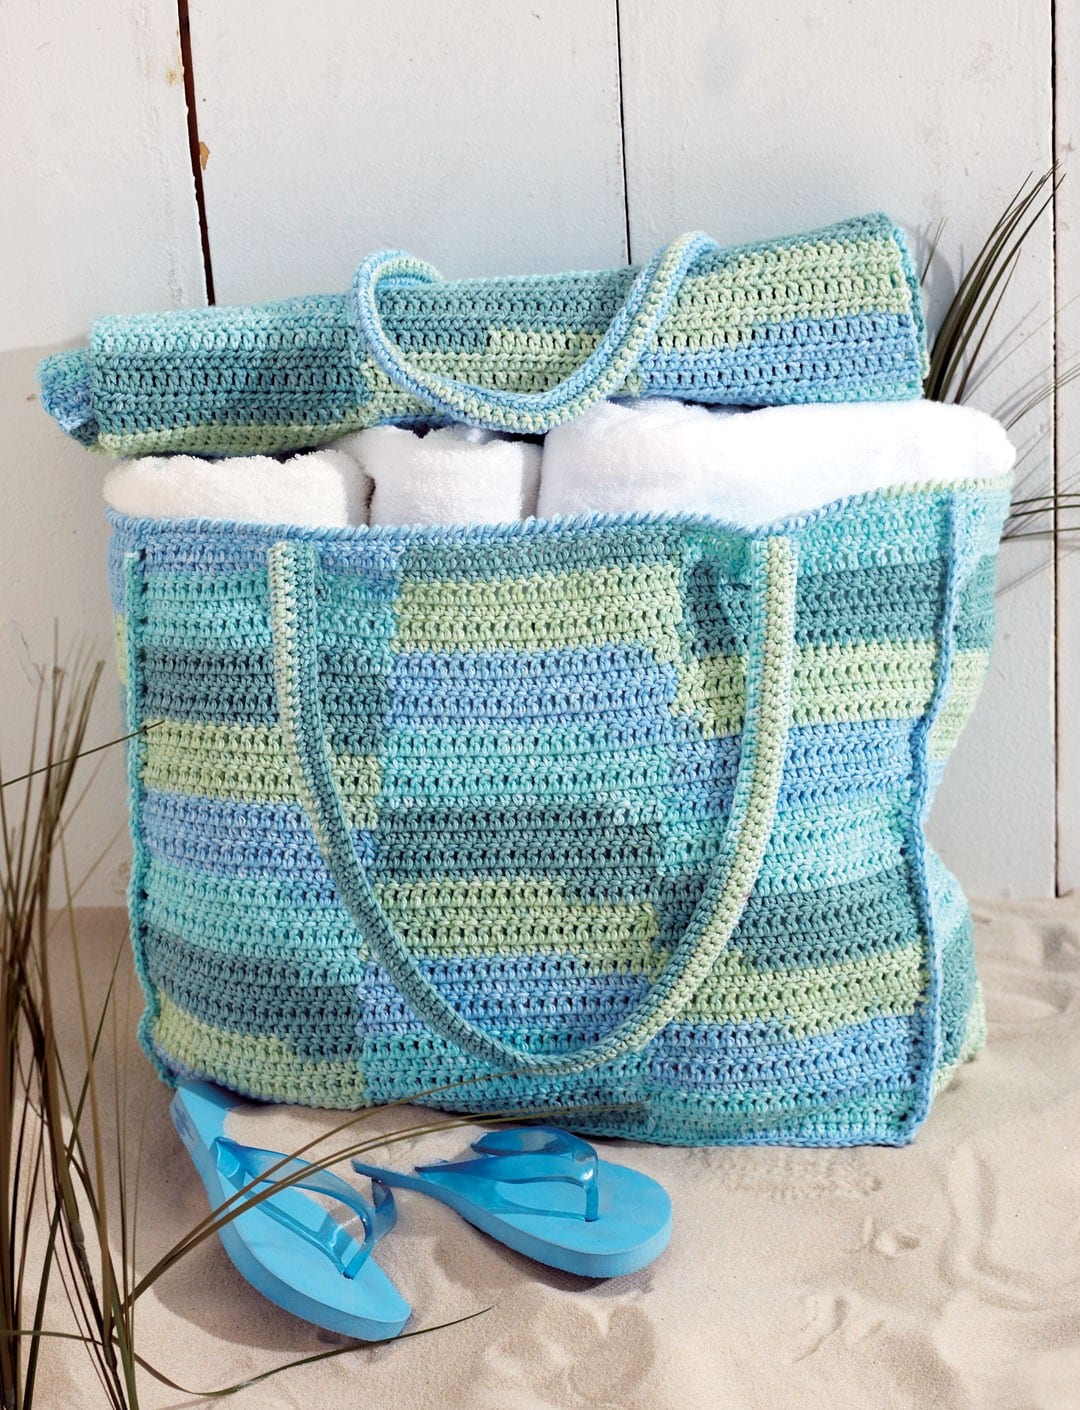 Crochet Bags and Totes for Spring • Sewrella